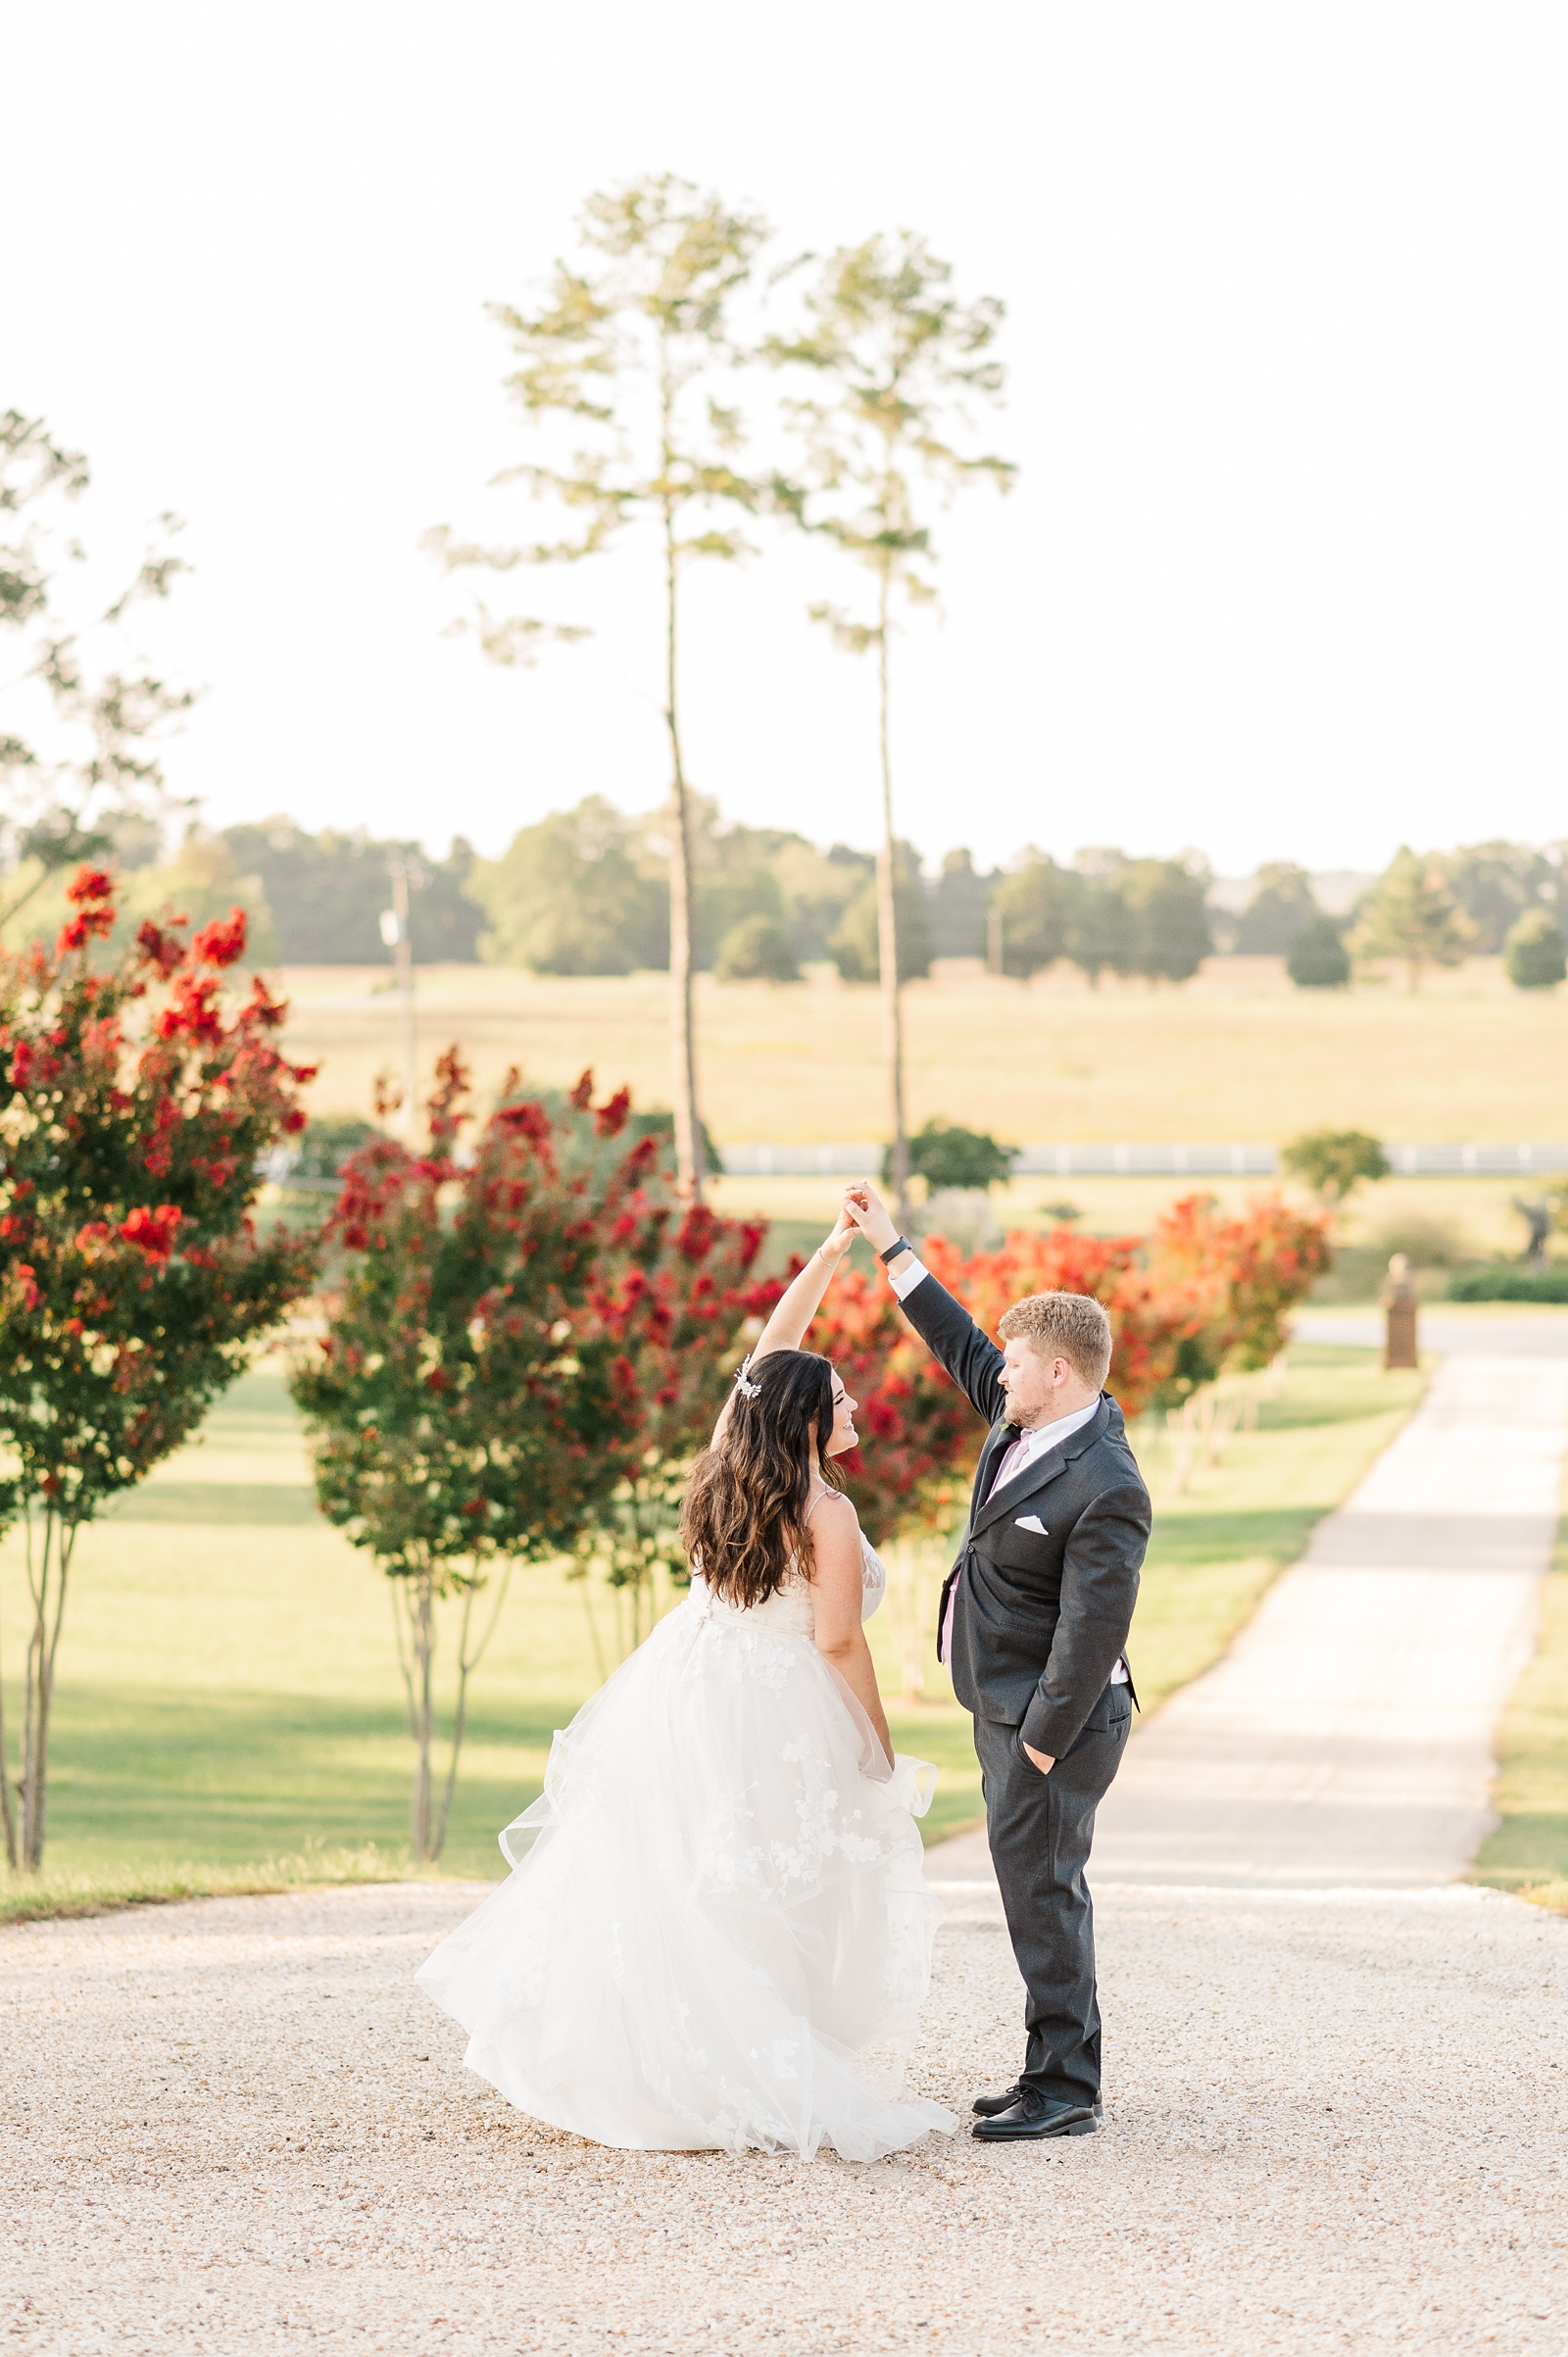 Bride Twirling During Bride and Groom Portraits at Cumberland Estate Wedding. Photography by Virginia Wedding Photographer Kailey Brianne Photography. 